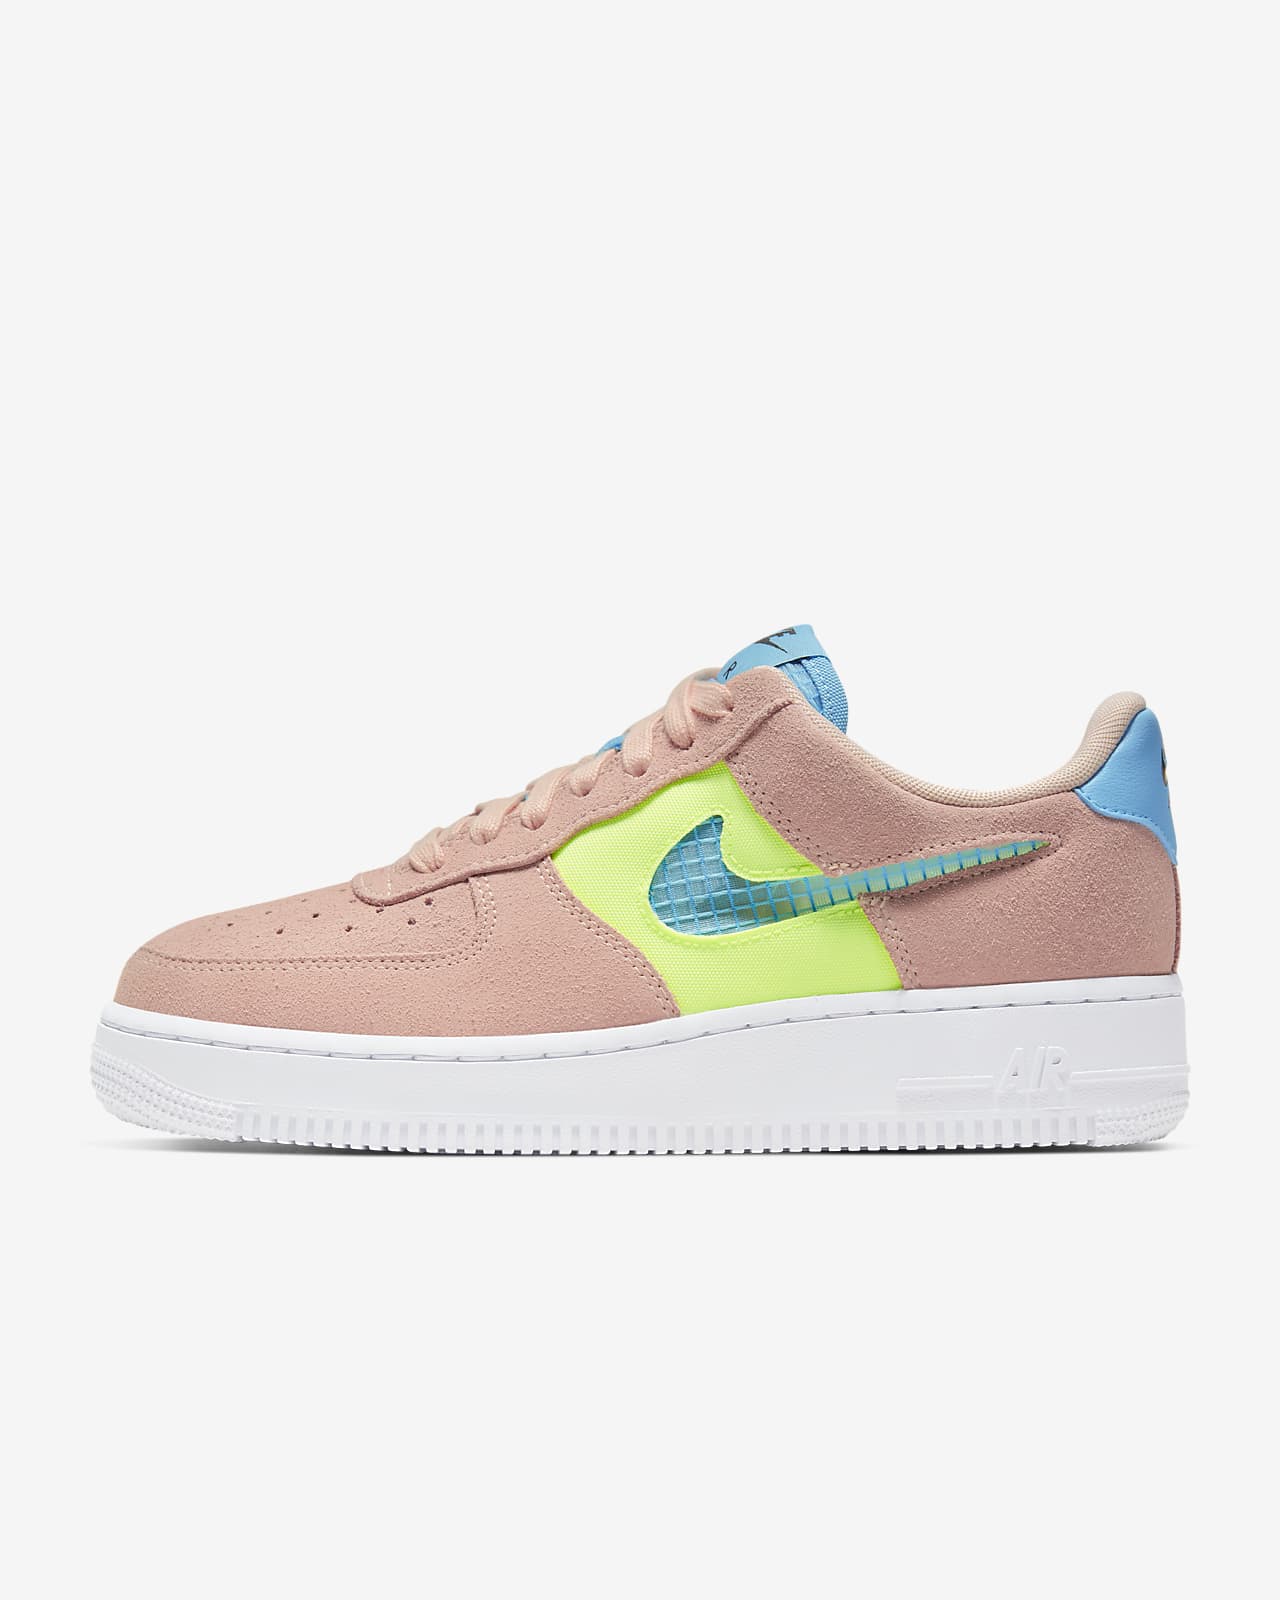 Chaussure Nike Air Force 1 '07 SE pour Femme